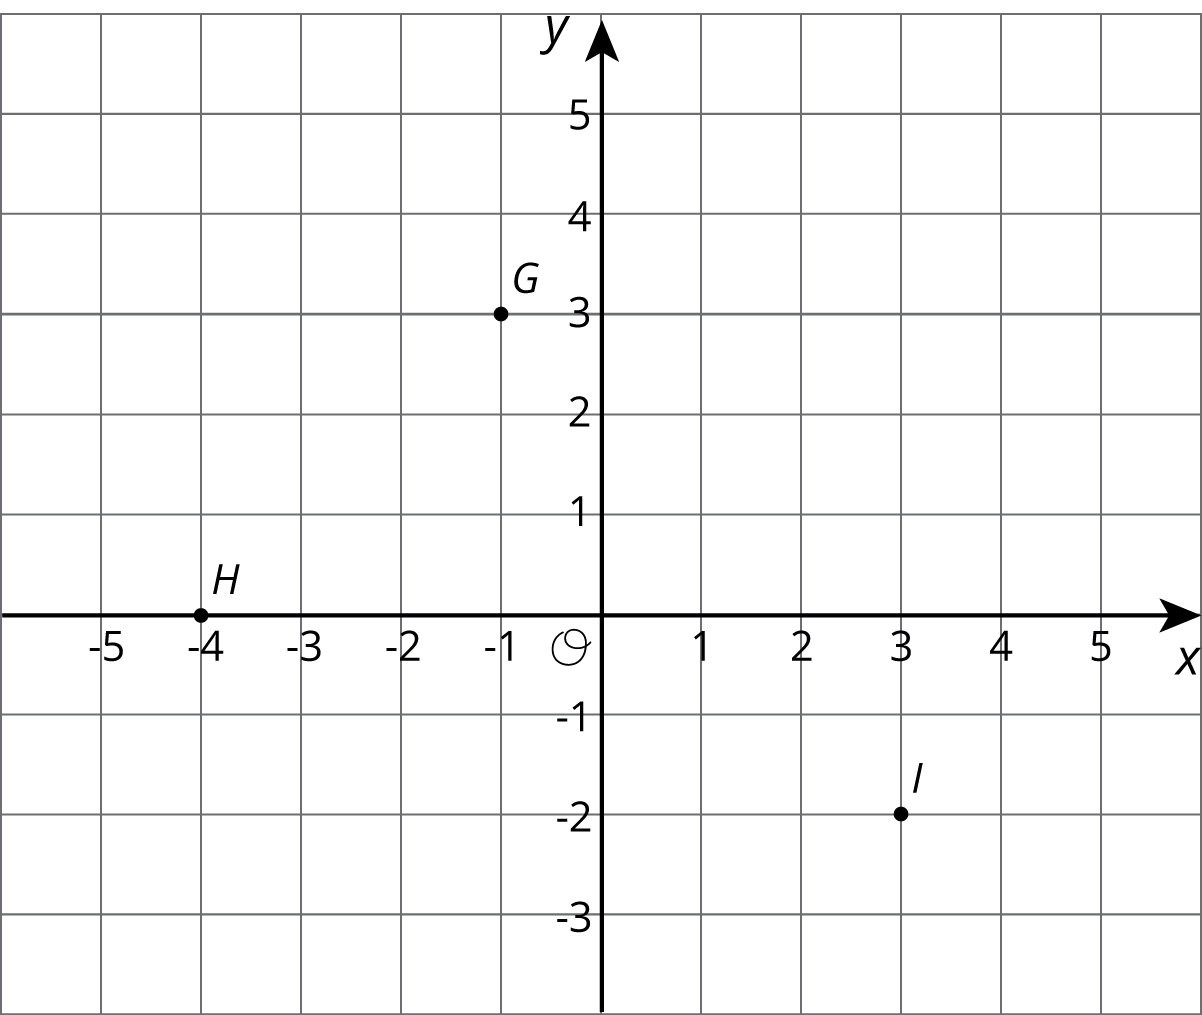 Three points labeled, G, H, and I, are plotted on a coordinate grid with the origin labeled “O.” Thex axis has the numbers negative 5 through 5 indicated. The y axis has the numbers negative 3 through 5 indicated. Point G is located at negative 1 comma 3. Point H is located at negative 4 comma 0. Point I is located at 3 comma negative 2.